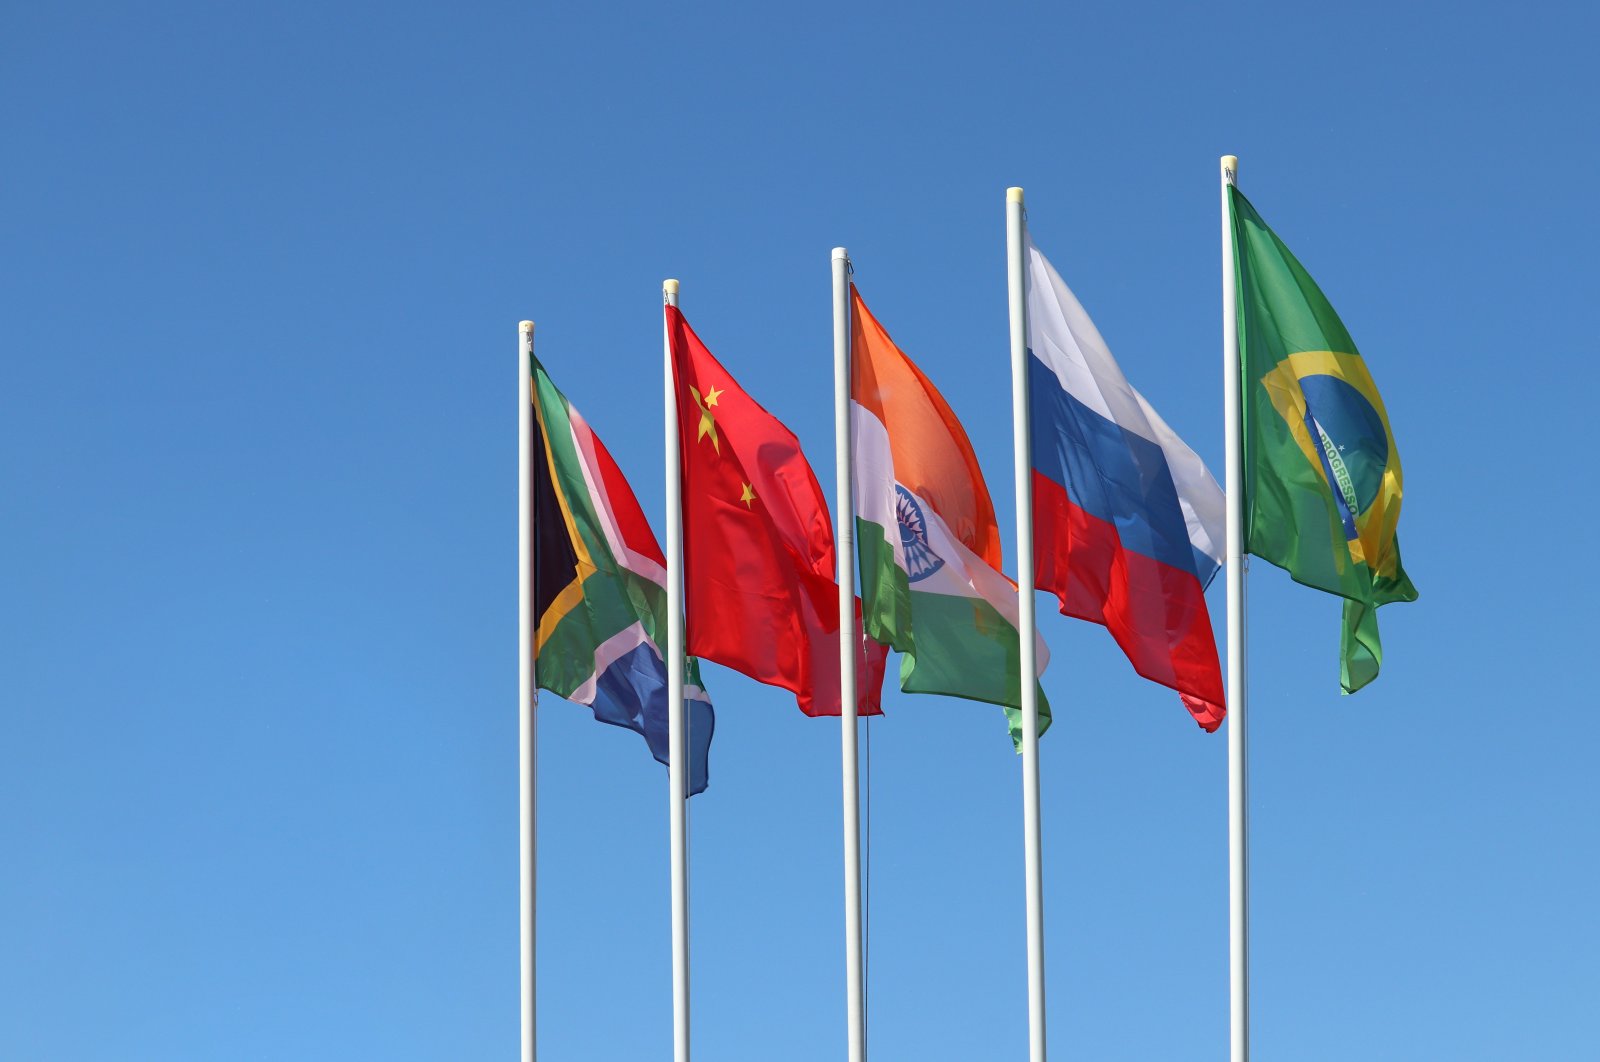 he countries that make up the Global South are discussing how they can develop more intensive cooperation in the global economic-political system on global and regional cooperation platforms such as BRICS (Brazil, Russia, India, China and South Africa) and the Shanghai Cooperation Organization (SCO). (Shutterstock Photo)